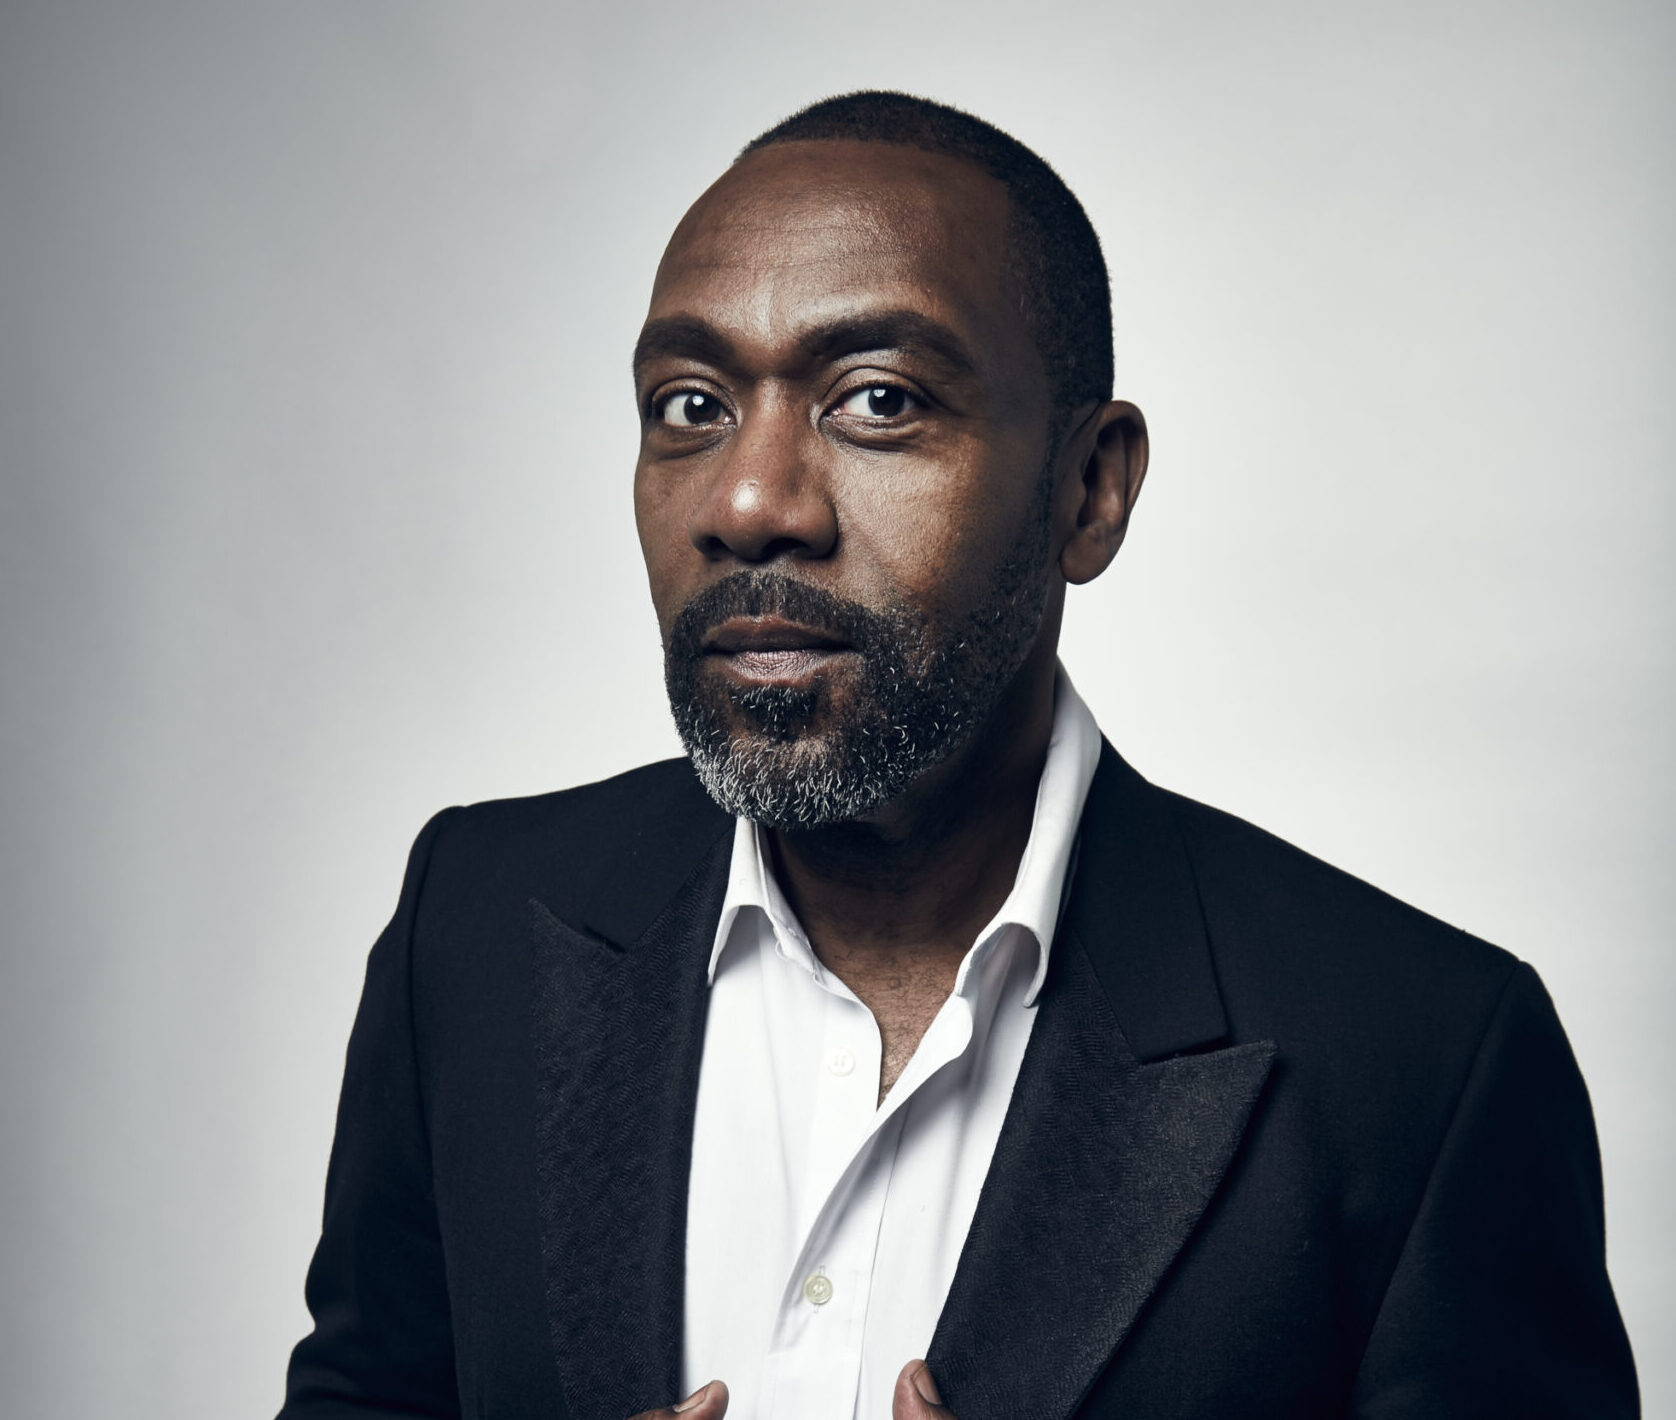 Sir Lenny Henry CBE to speak at Safety and Health Expo next week - pic